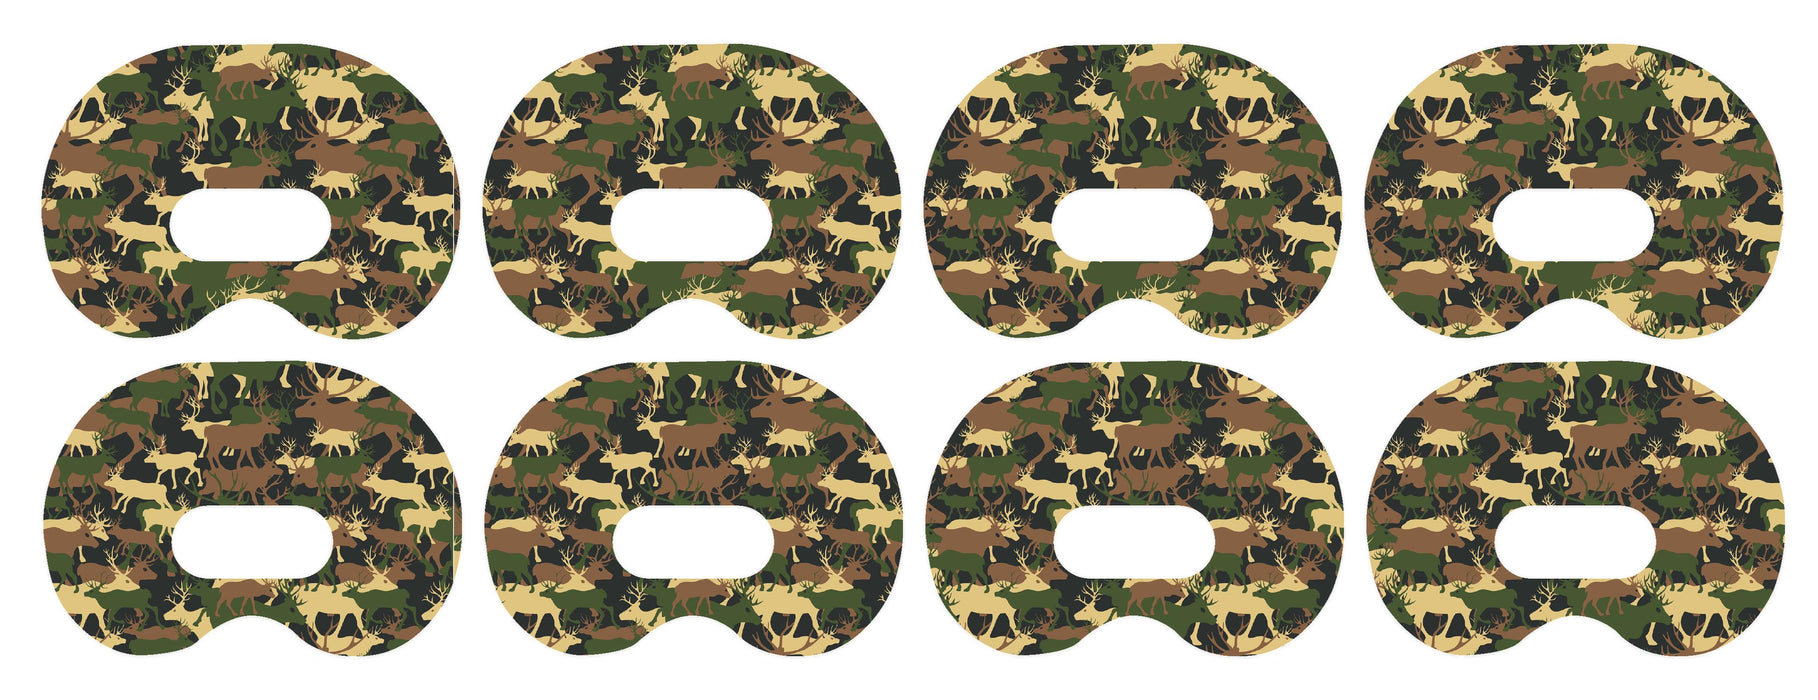 Reindeer Camo Patch+ Medtronic Cgm Tape 4-Pack